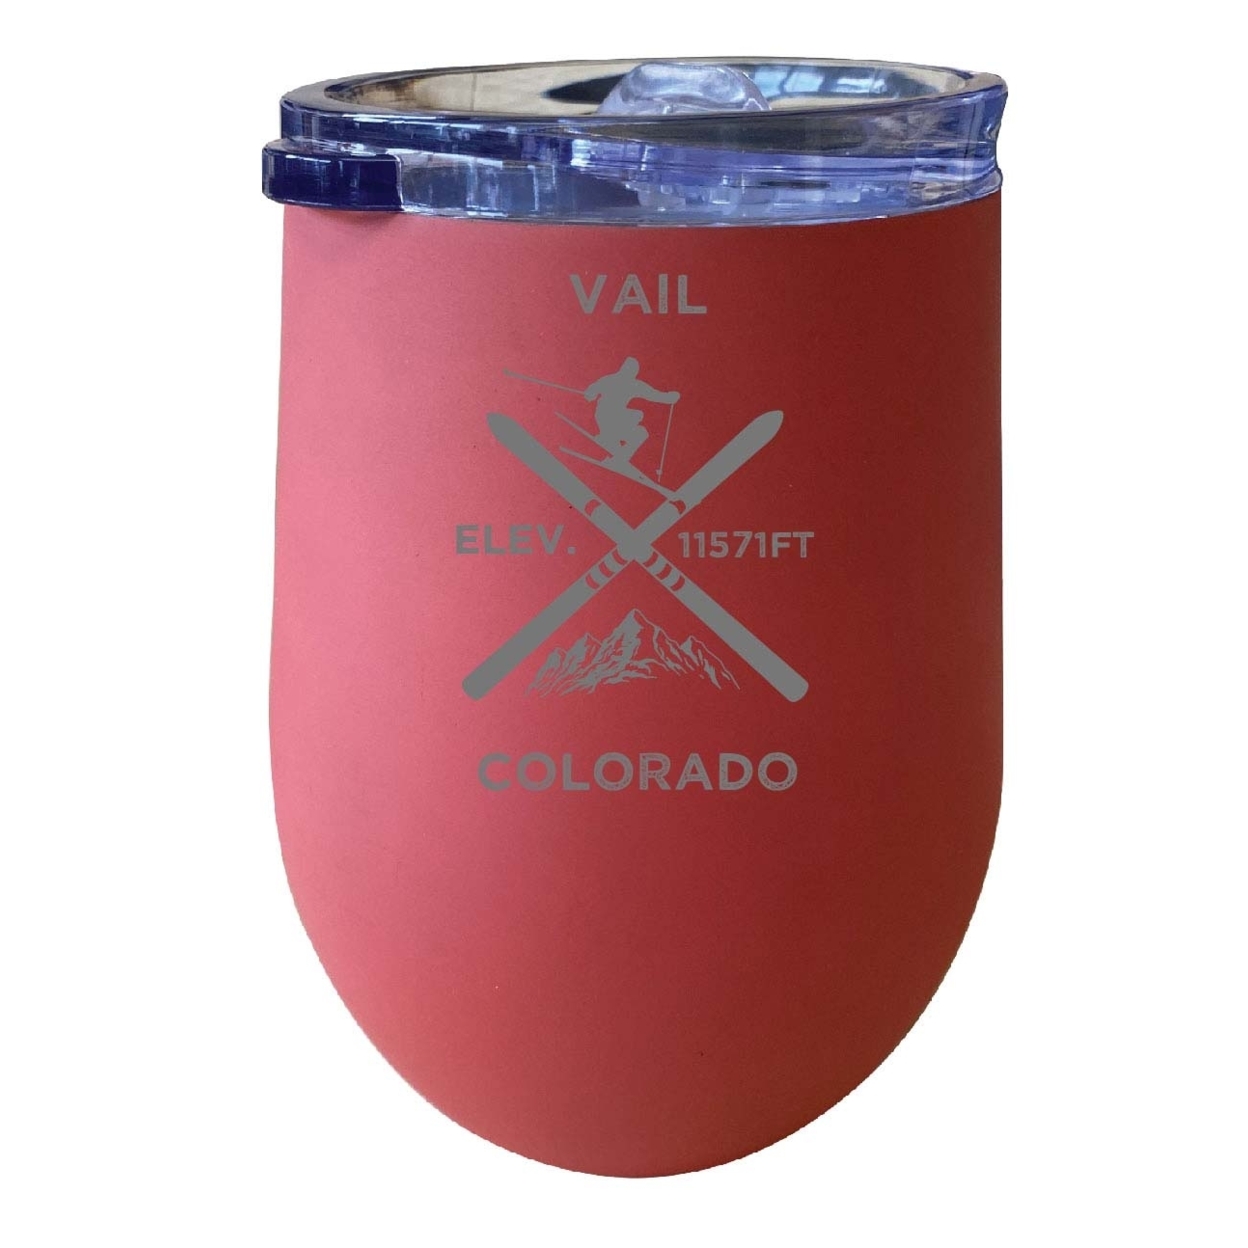 Vail Colorado Ski Souvenir 12 Oz Laser Etched Insulated Wine Stainless Steel Tumbler - Rose Gold